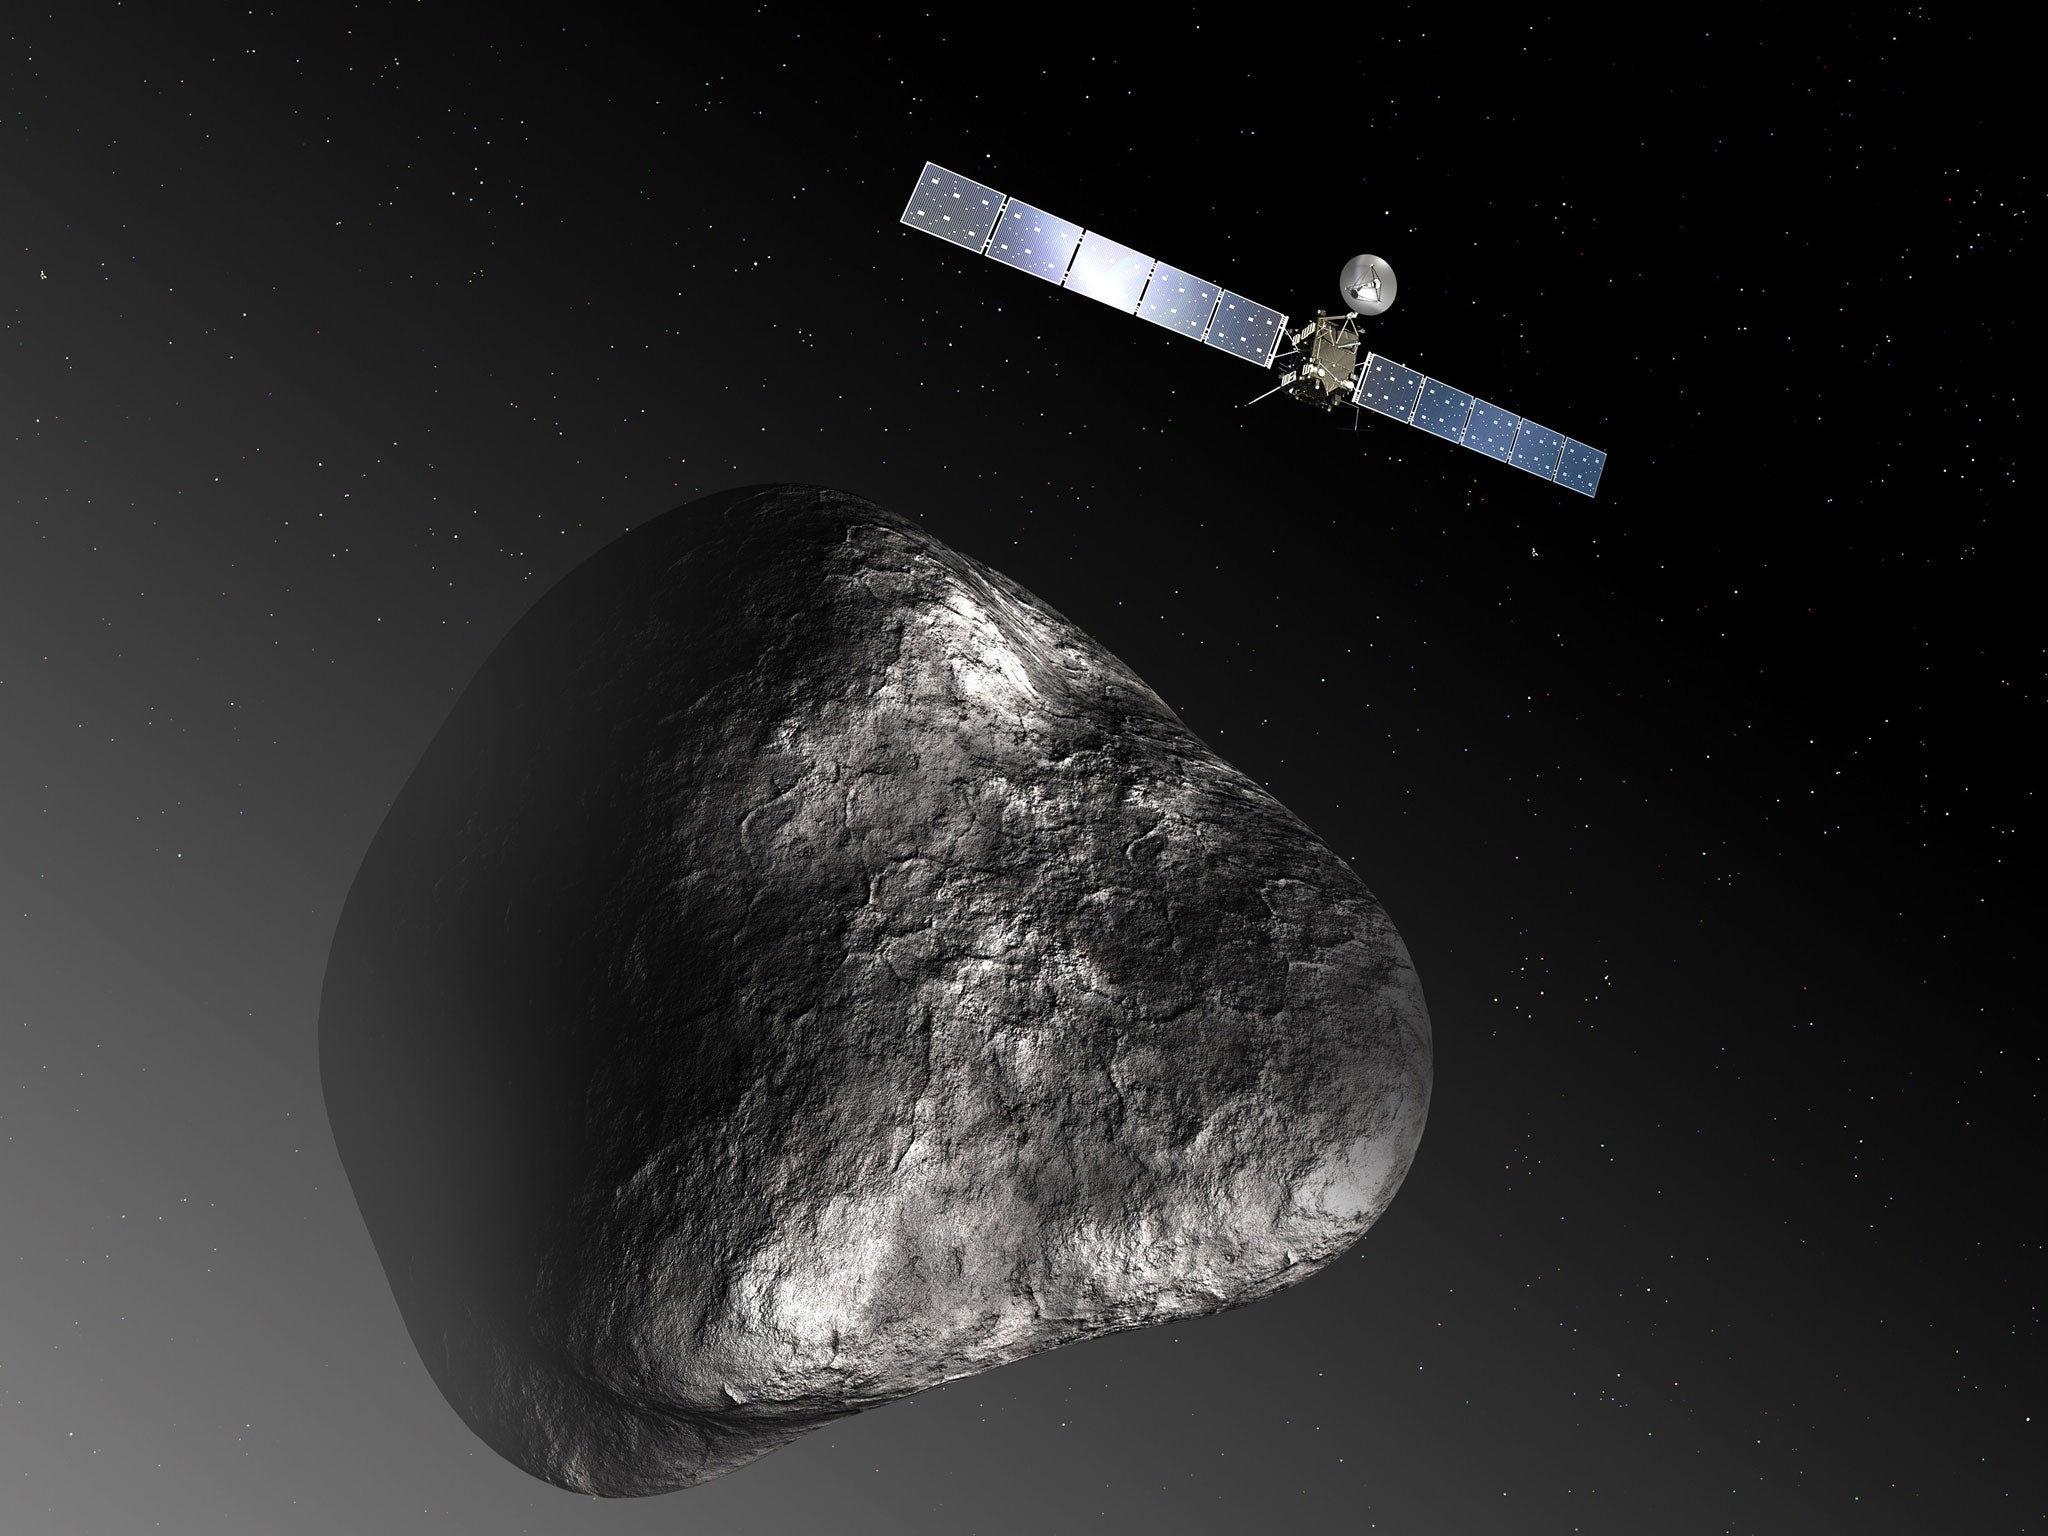 An artist’s impression of the unmanned ‘Rosetta’, which is expected be the first spacecraft to land on the surface of a comet